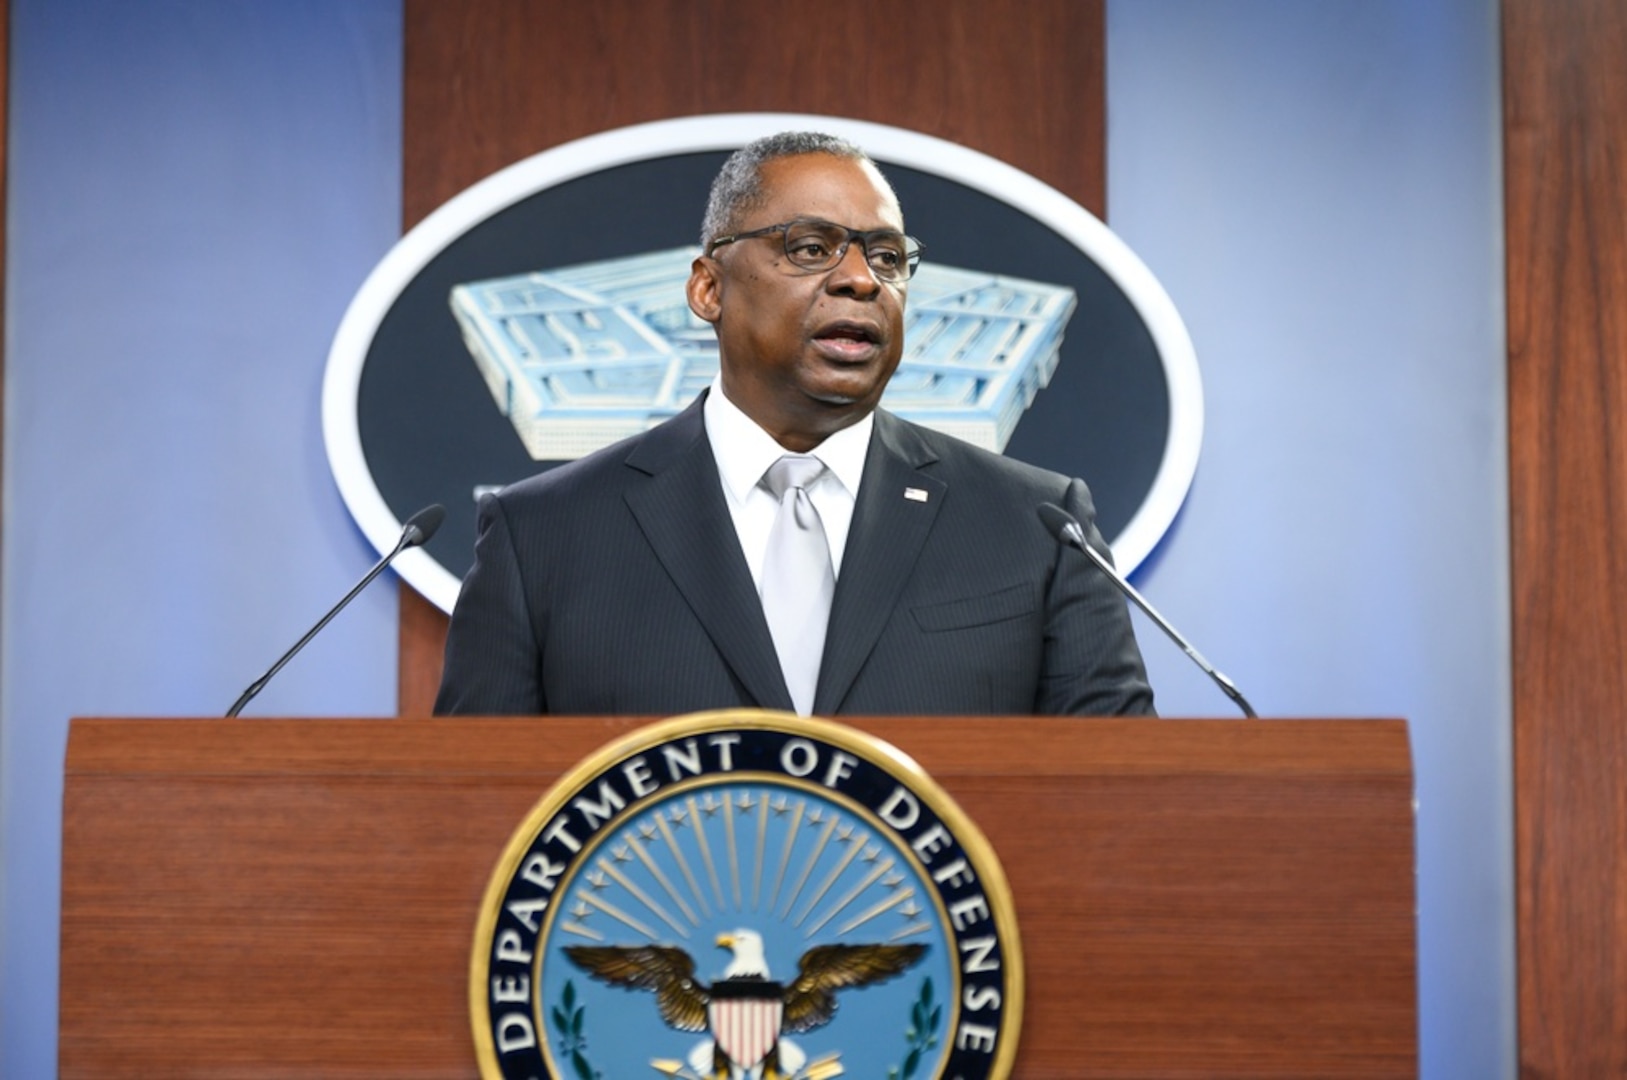 A man stands at a lectern. The sign behind him indicates he is at the Pentagon.